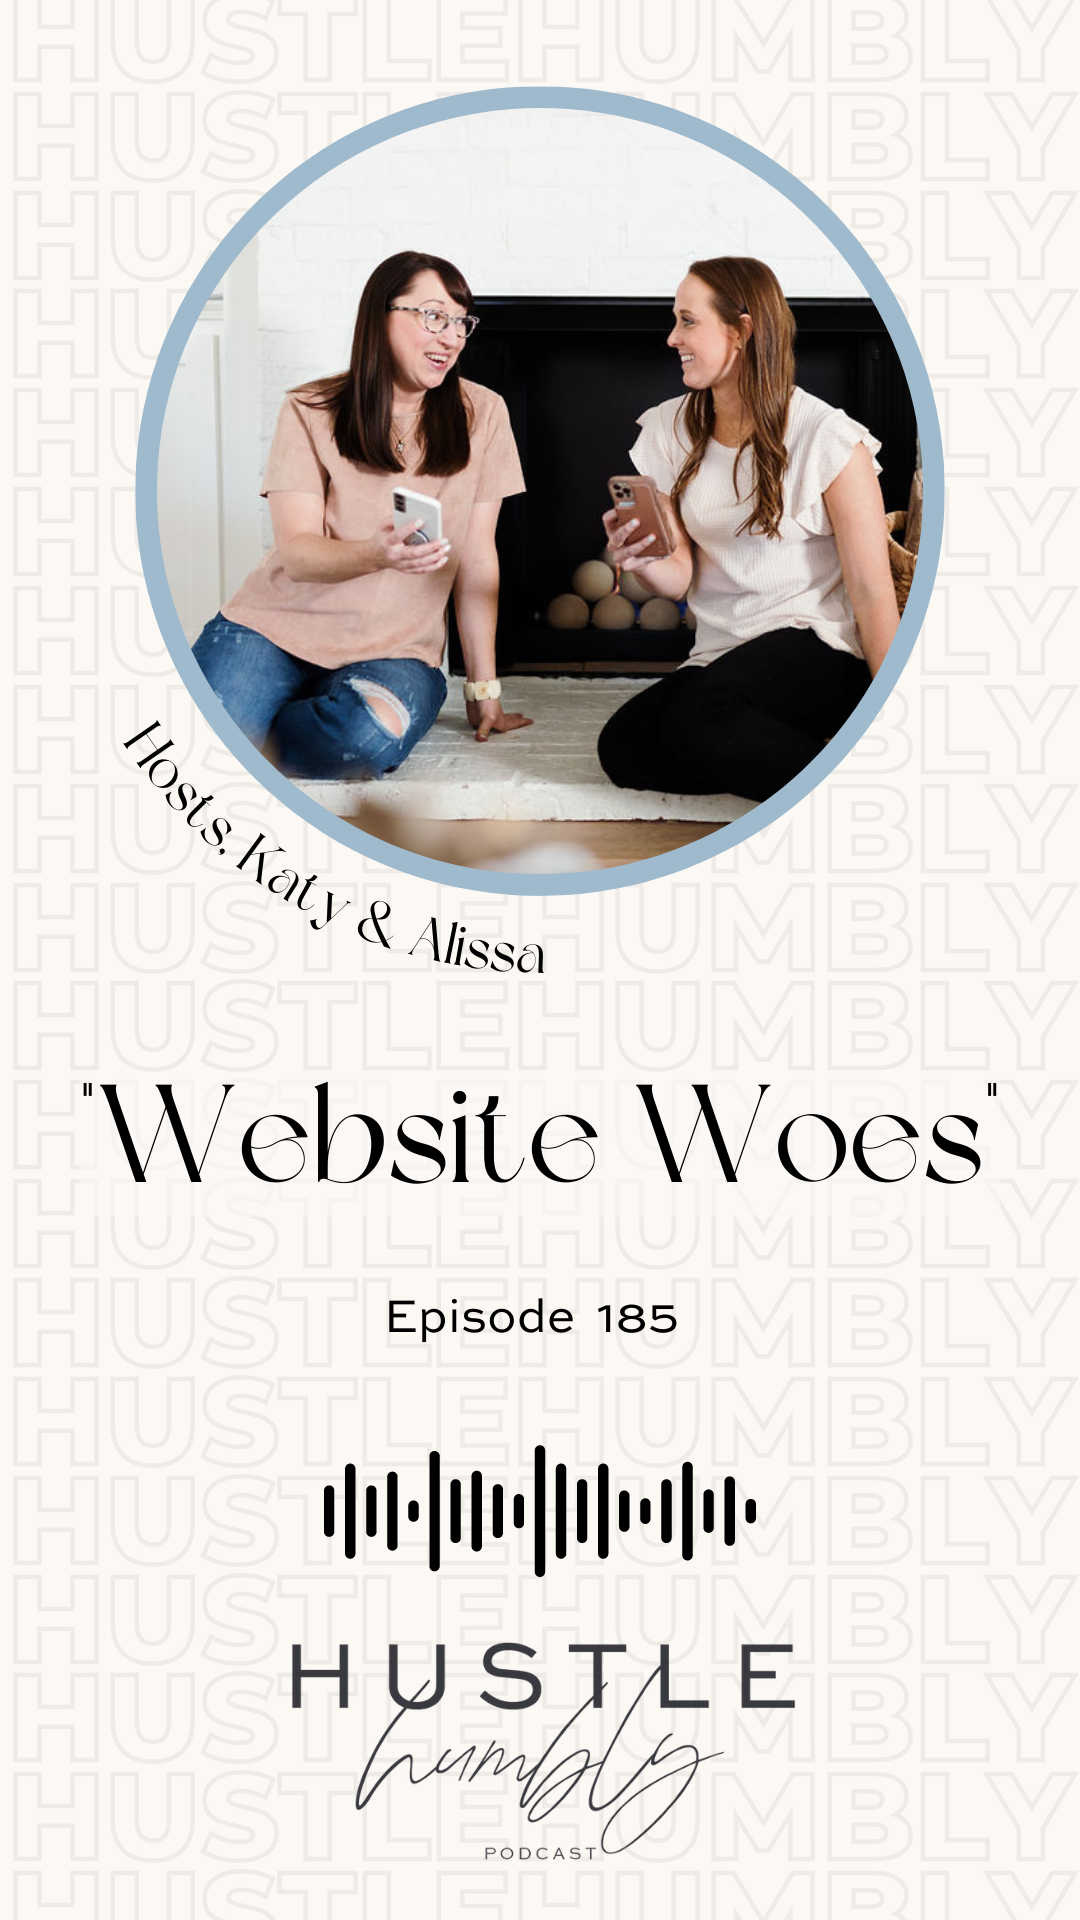 Two women discussing real estate websites